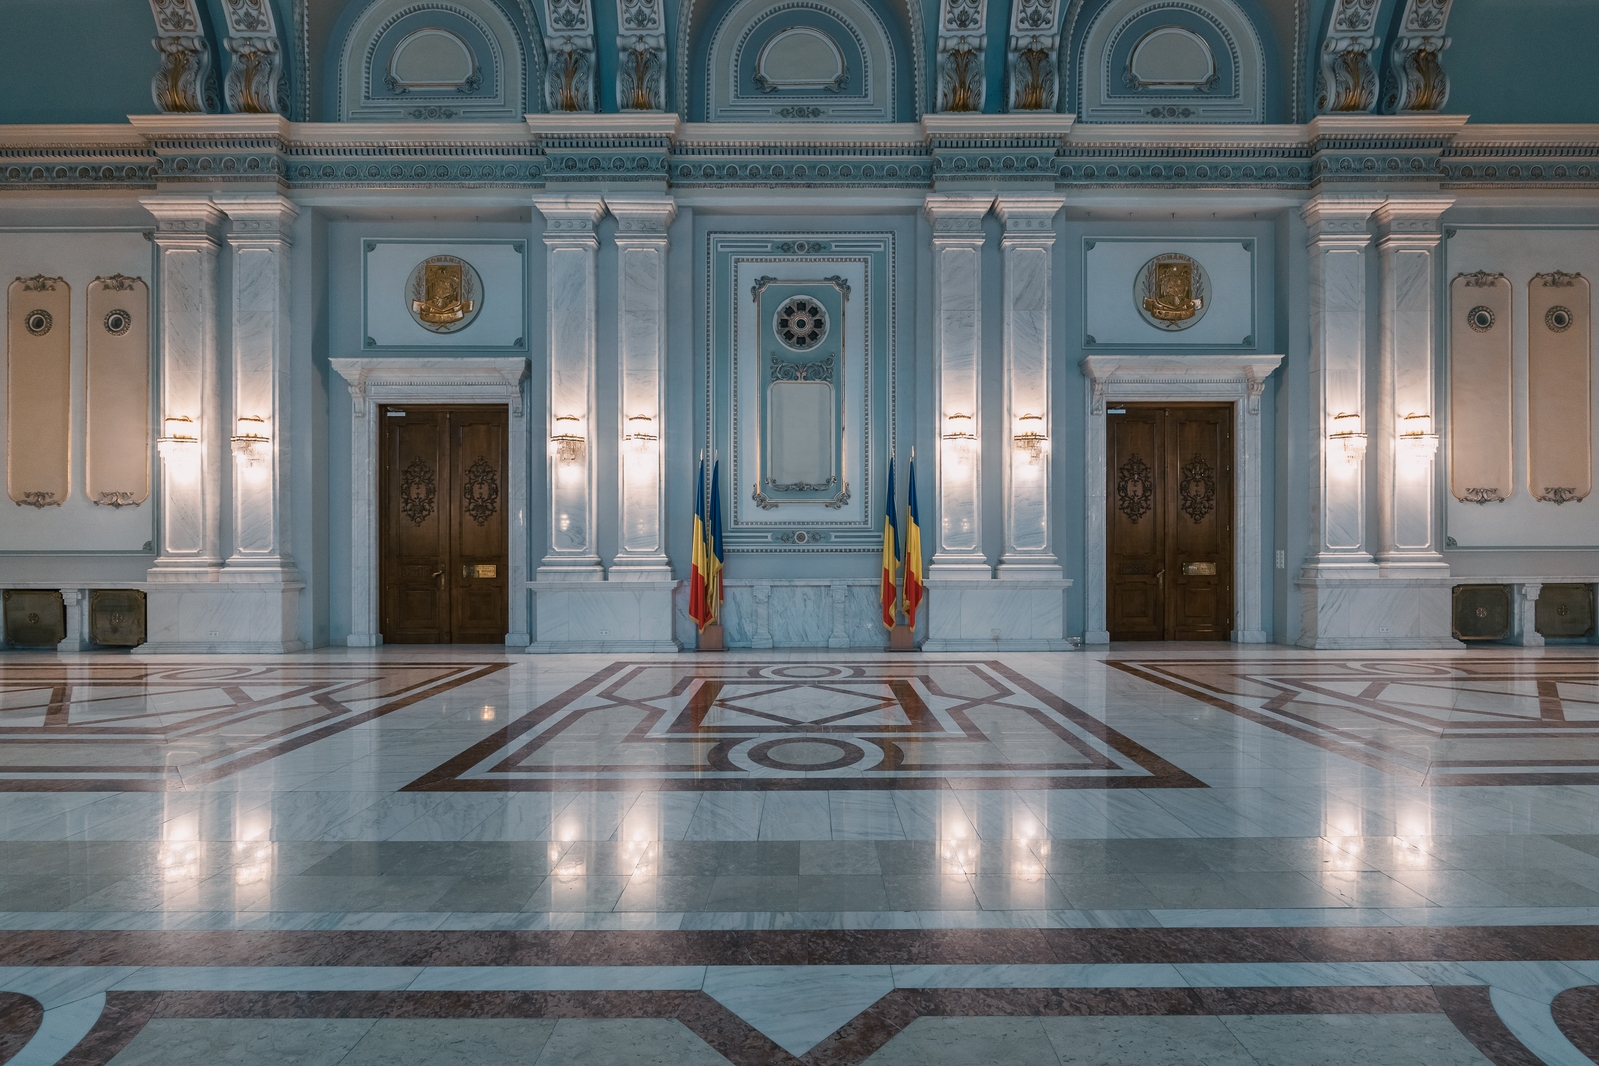 Image of Palace of Parliament (Interior) by James Billings.